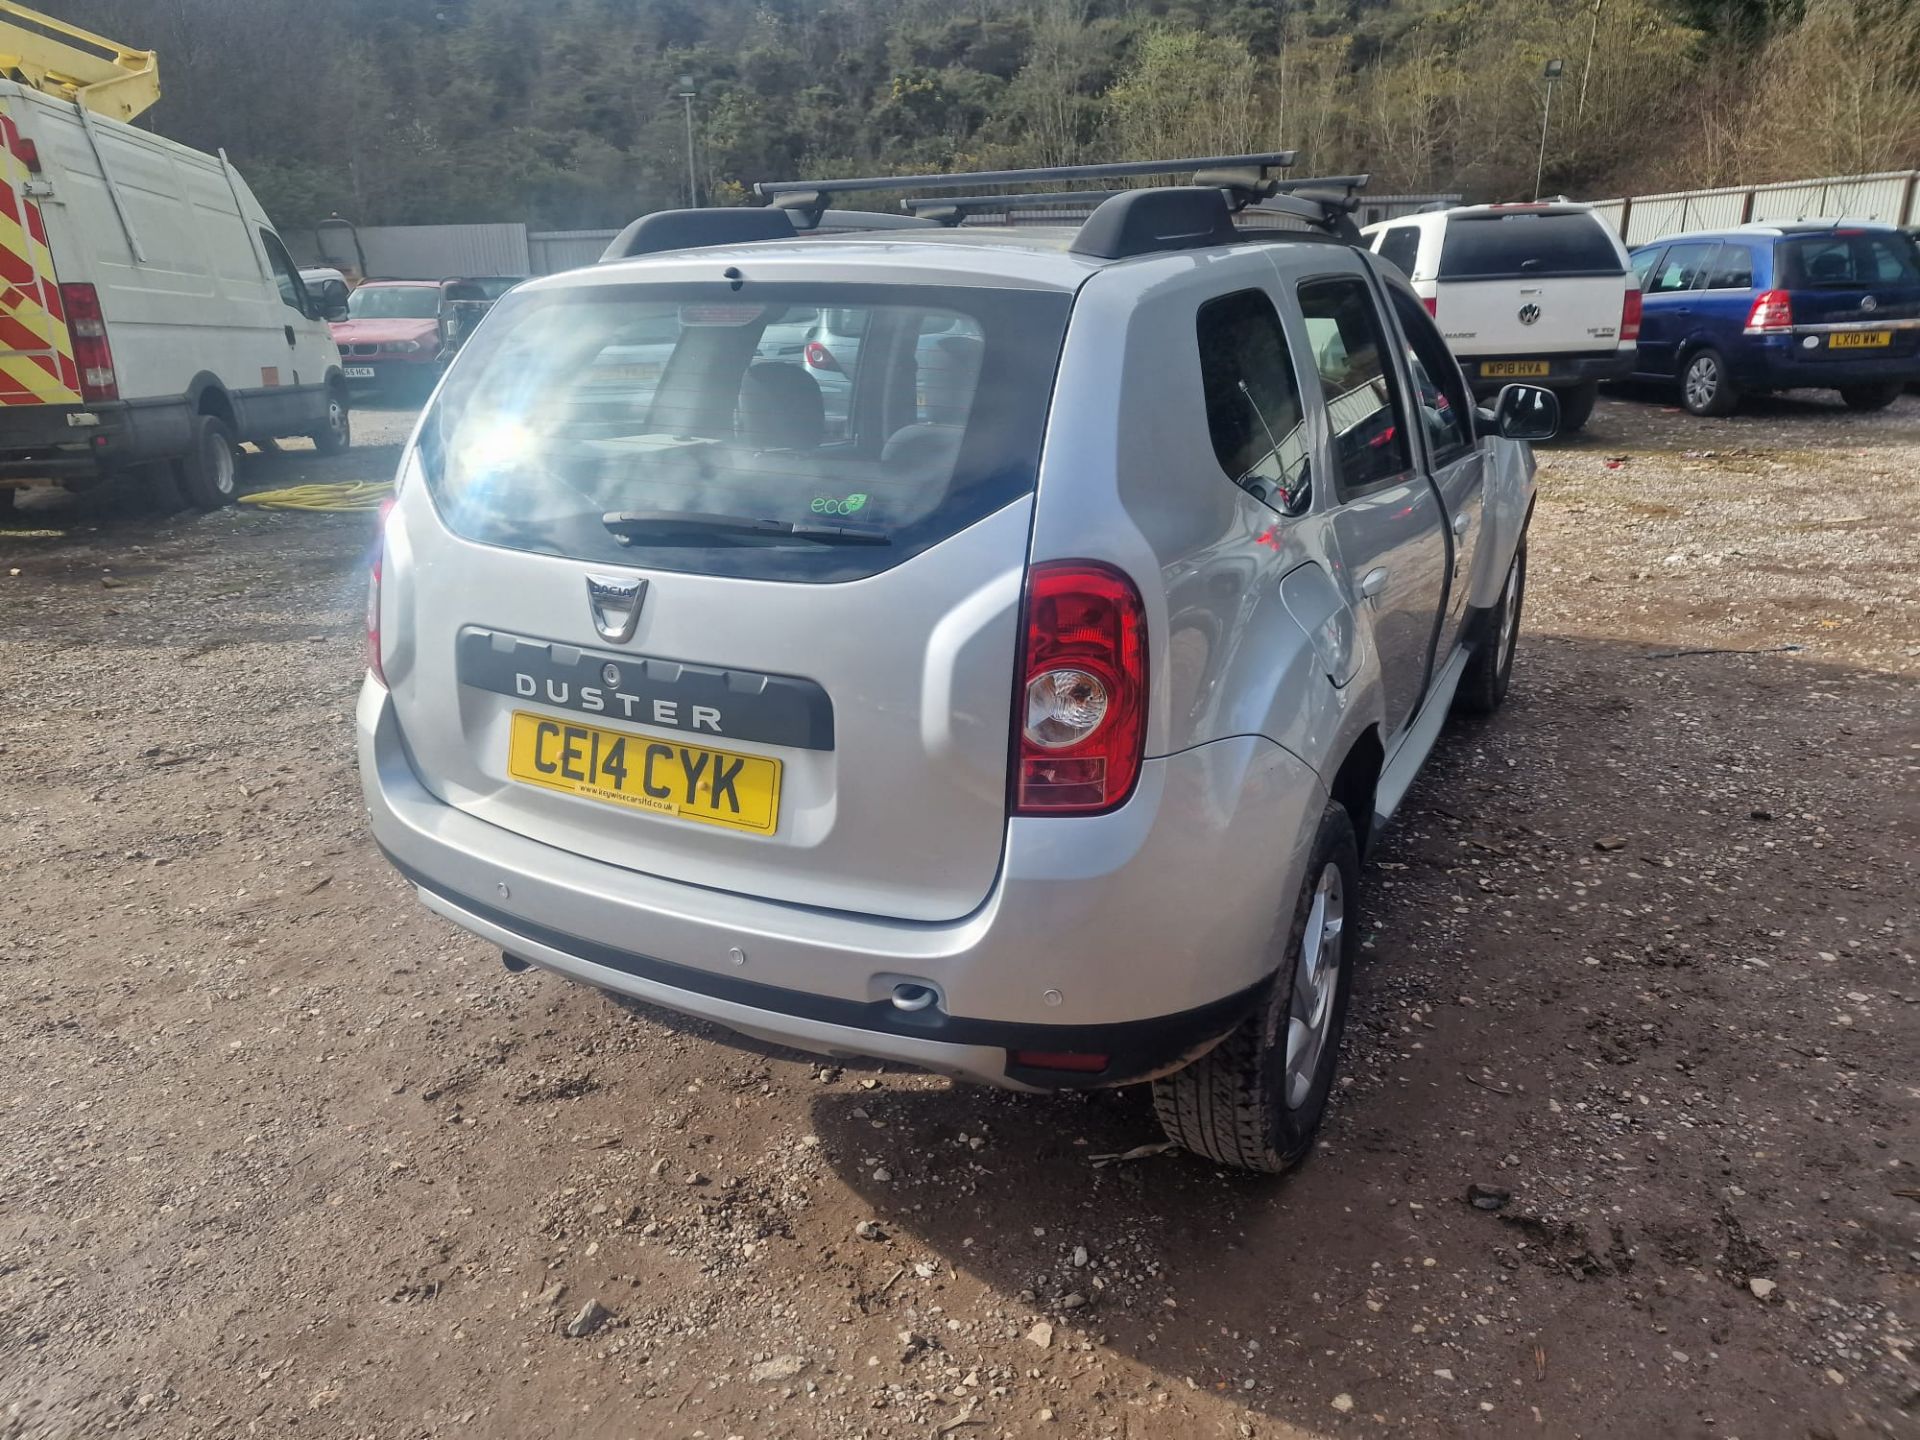 14/14 DACIA DUSTER LAUREATE DCI 4X2 - 1461cc 5dr Hatchback (Silver) - Image 2 of 12